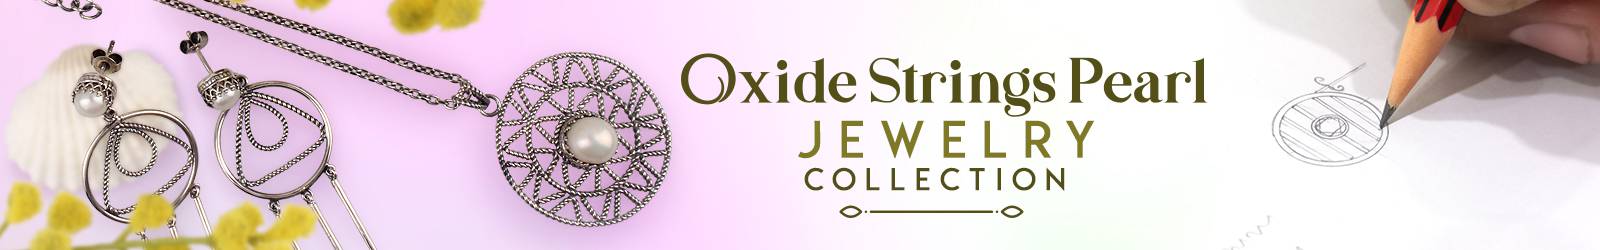 Oxide Strings Pearl Jewelry Manufacturer